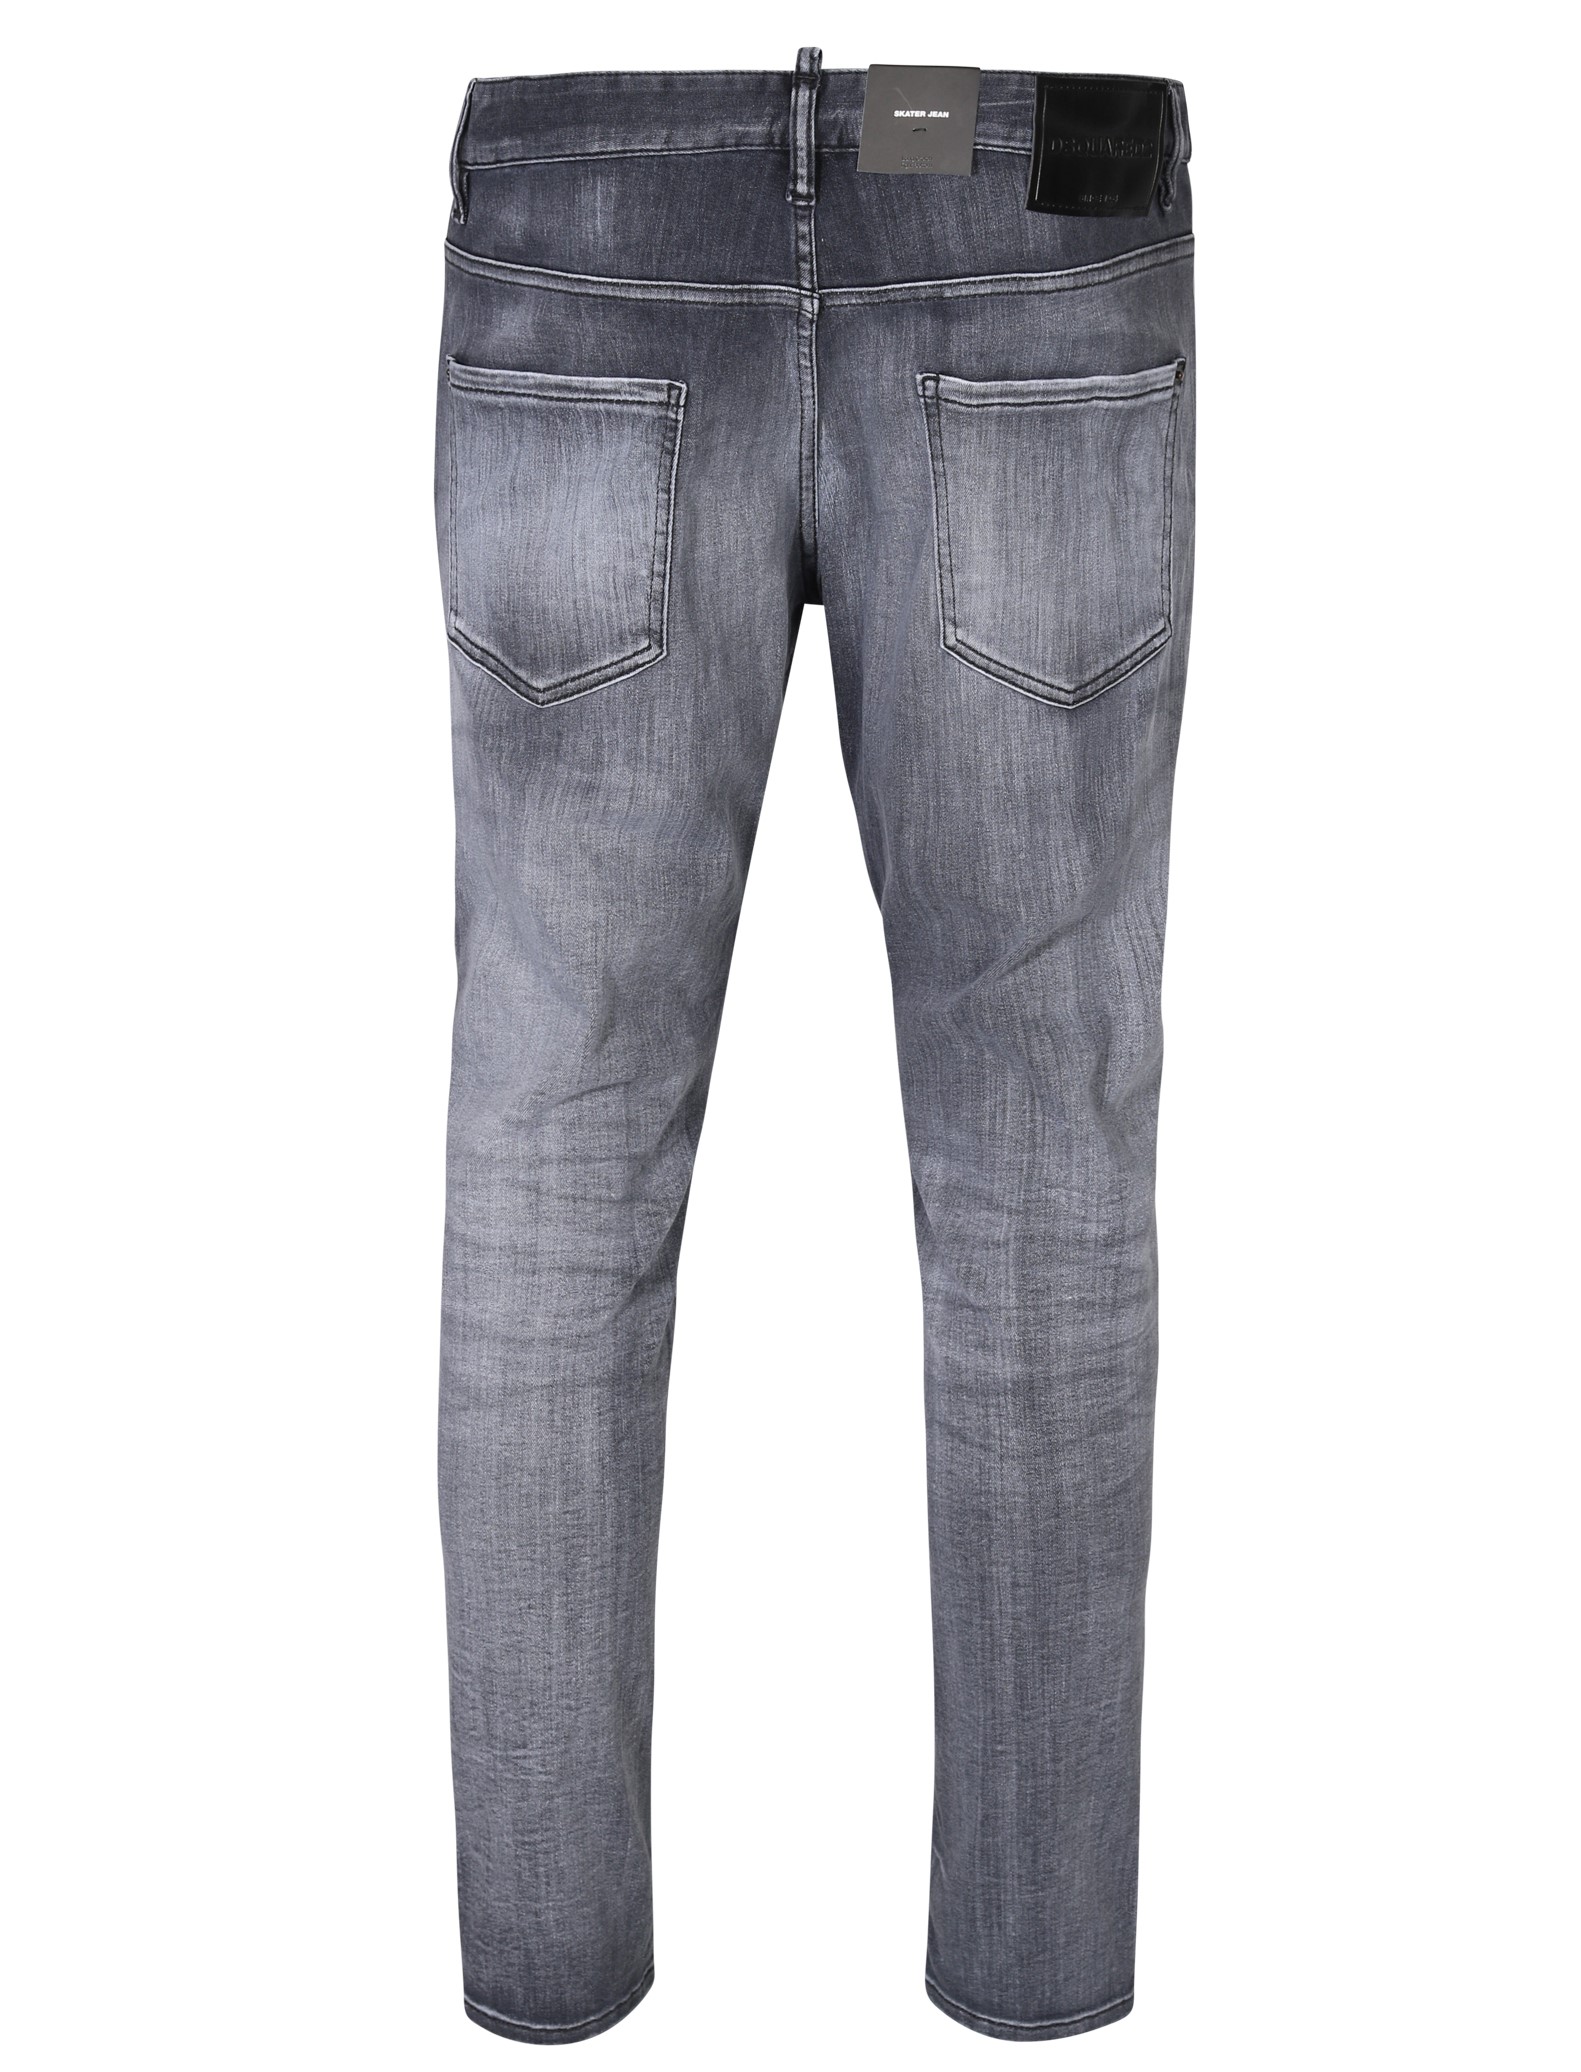 DSQUARED2 Skater Jeans in Washed Grey 50